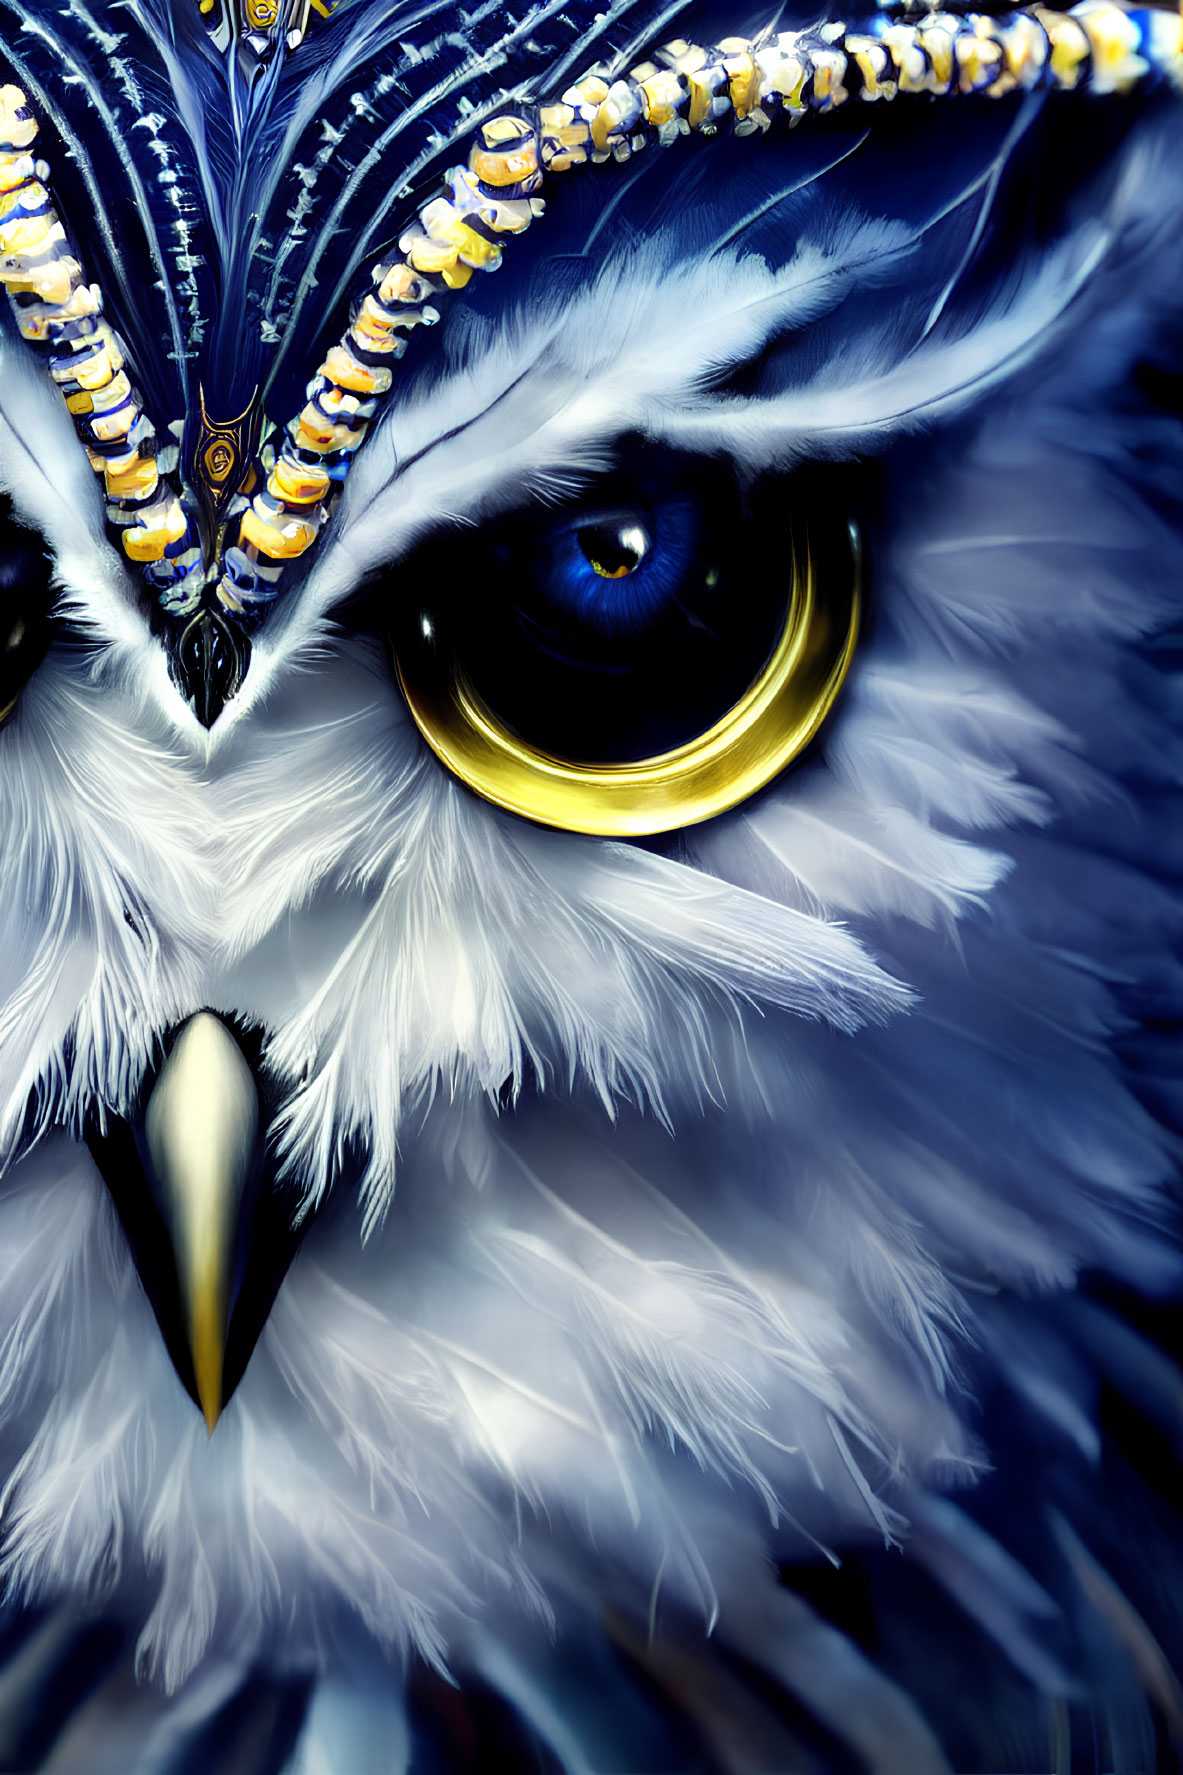 Detailed digital art of owl's face with striking blue eyes and ornate headdress